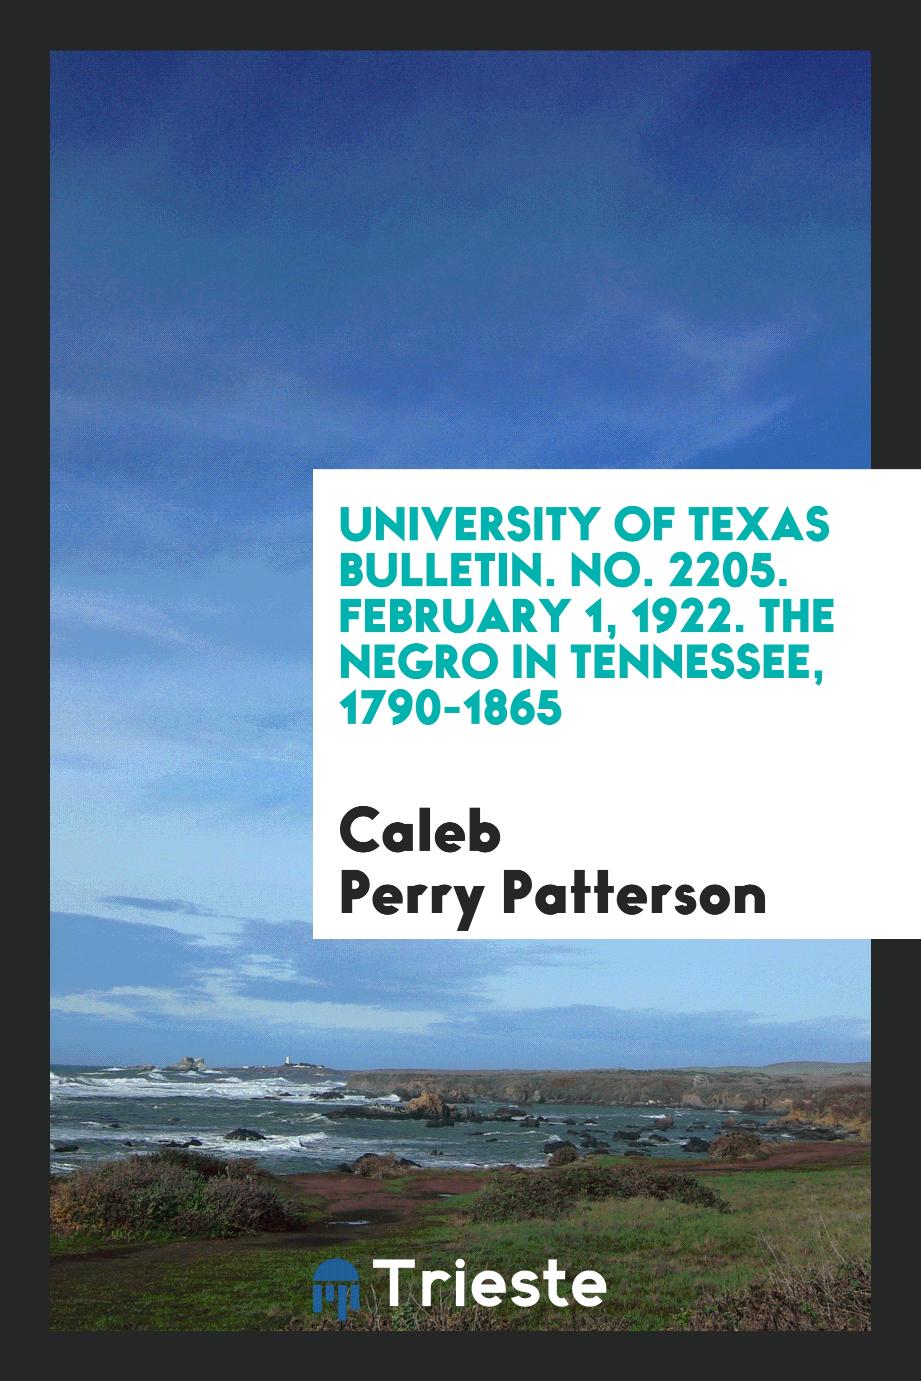 University of Texas Bulletin. No. 2205. February 1, 1922. The Negro in Tennessee, 1790-1865